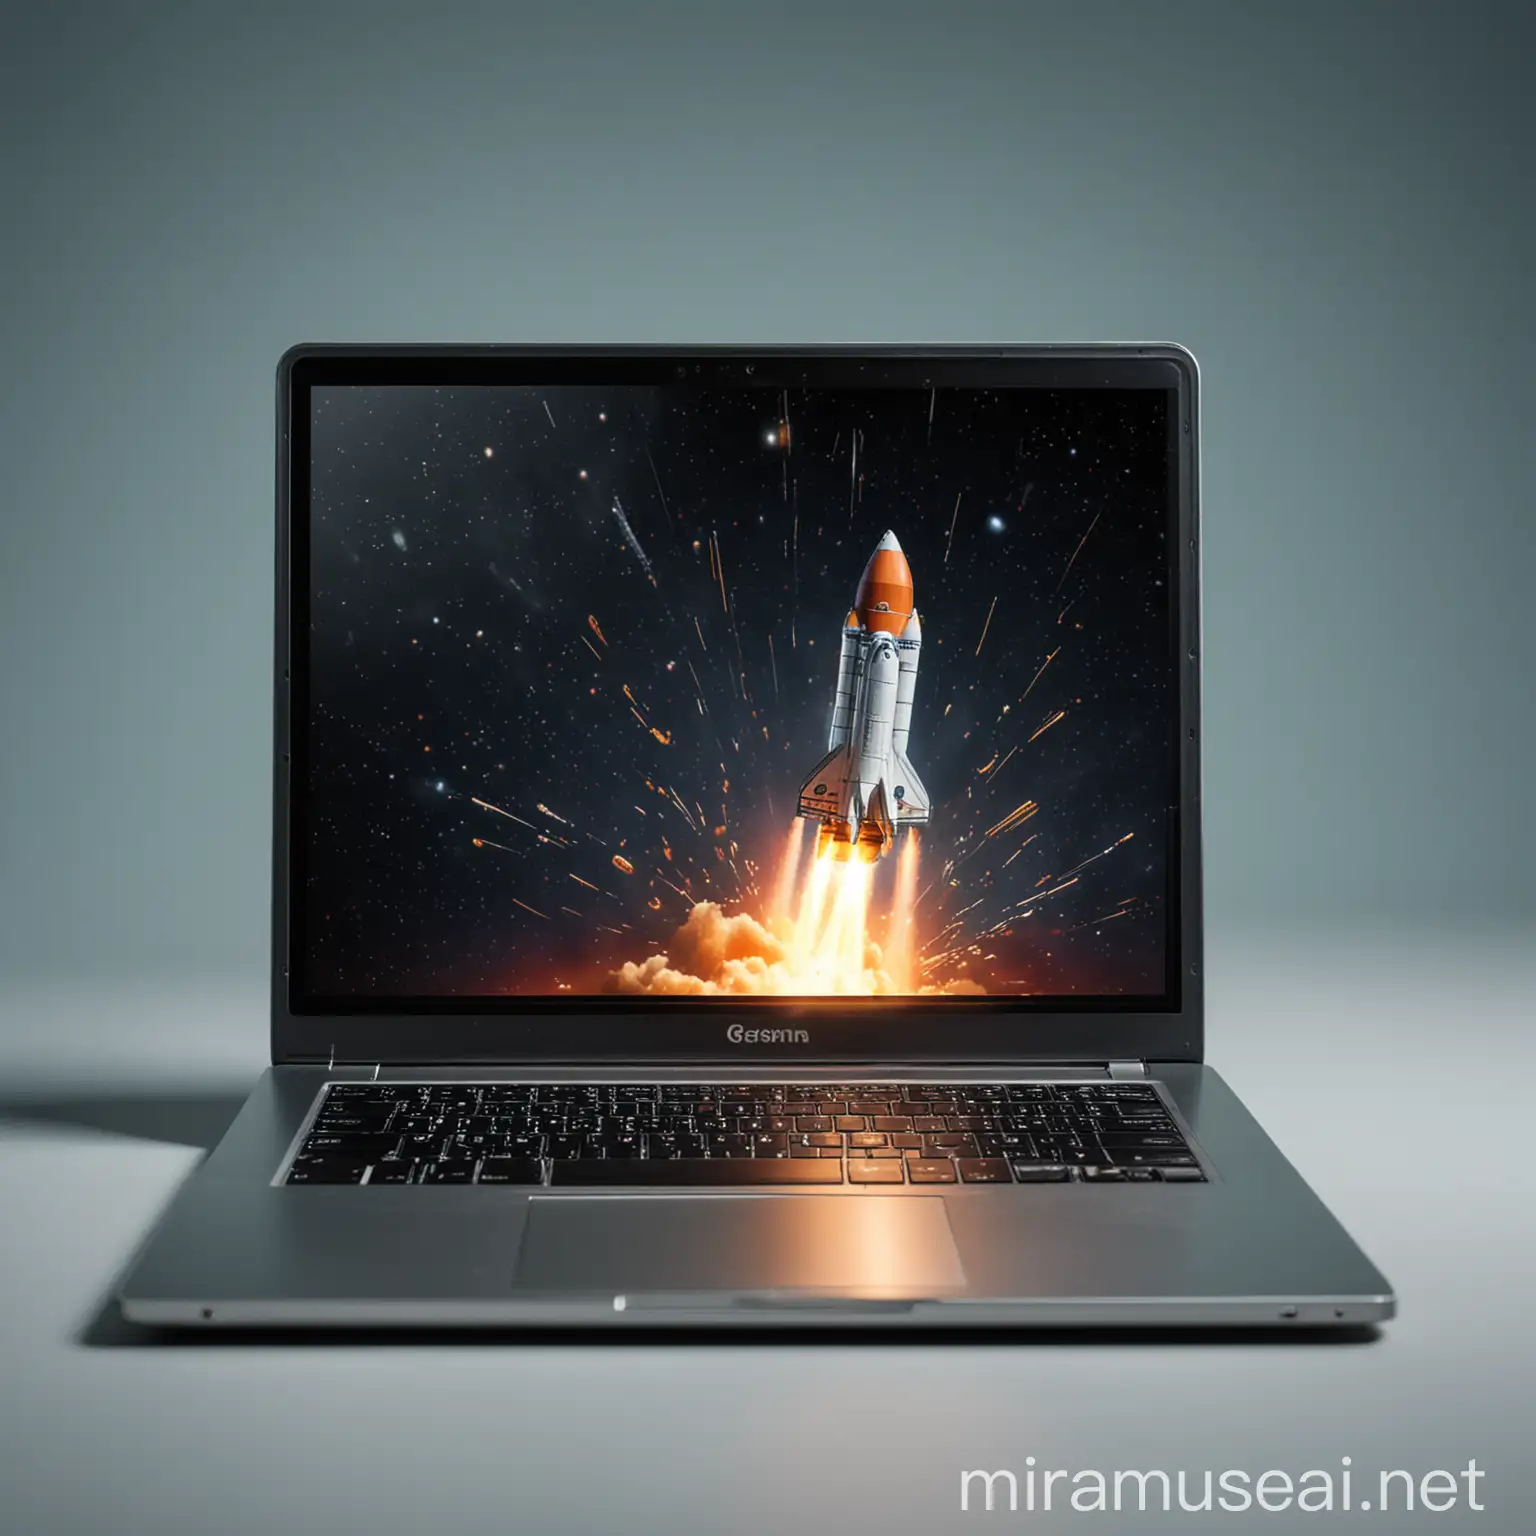 A small rocket that has an open top of the laptop and infinite speed is shown on the laptop screen. The image should be small so that the laptop falls completely.